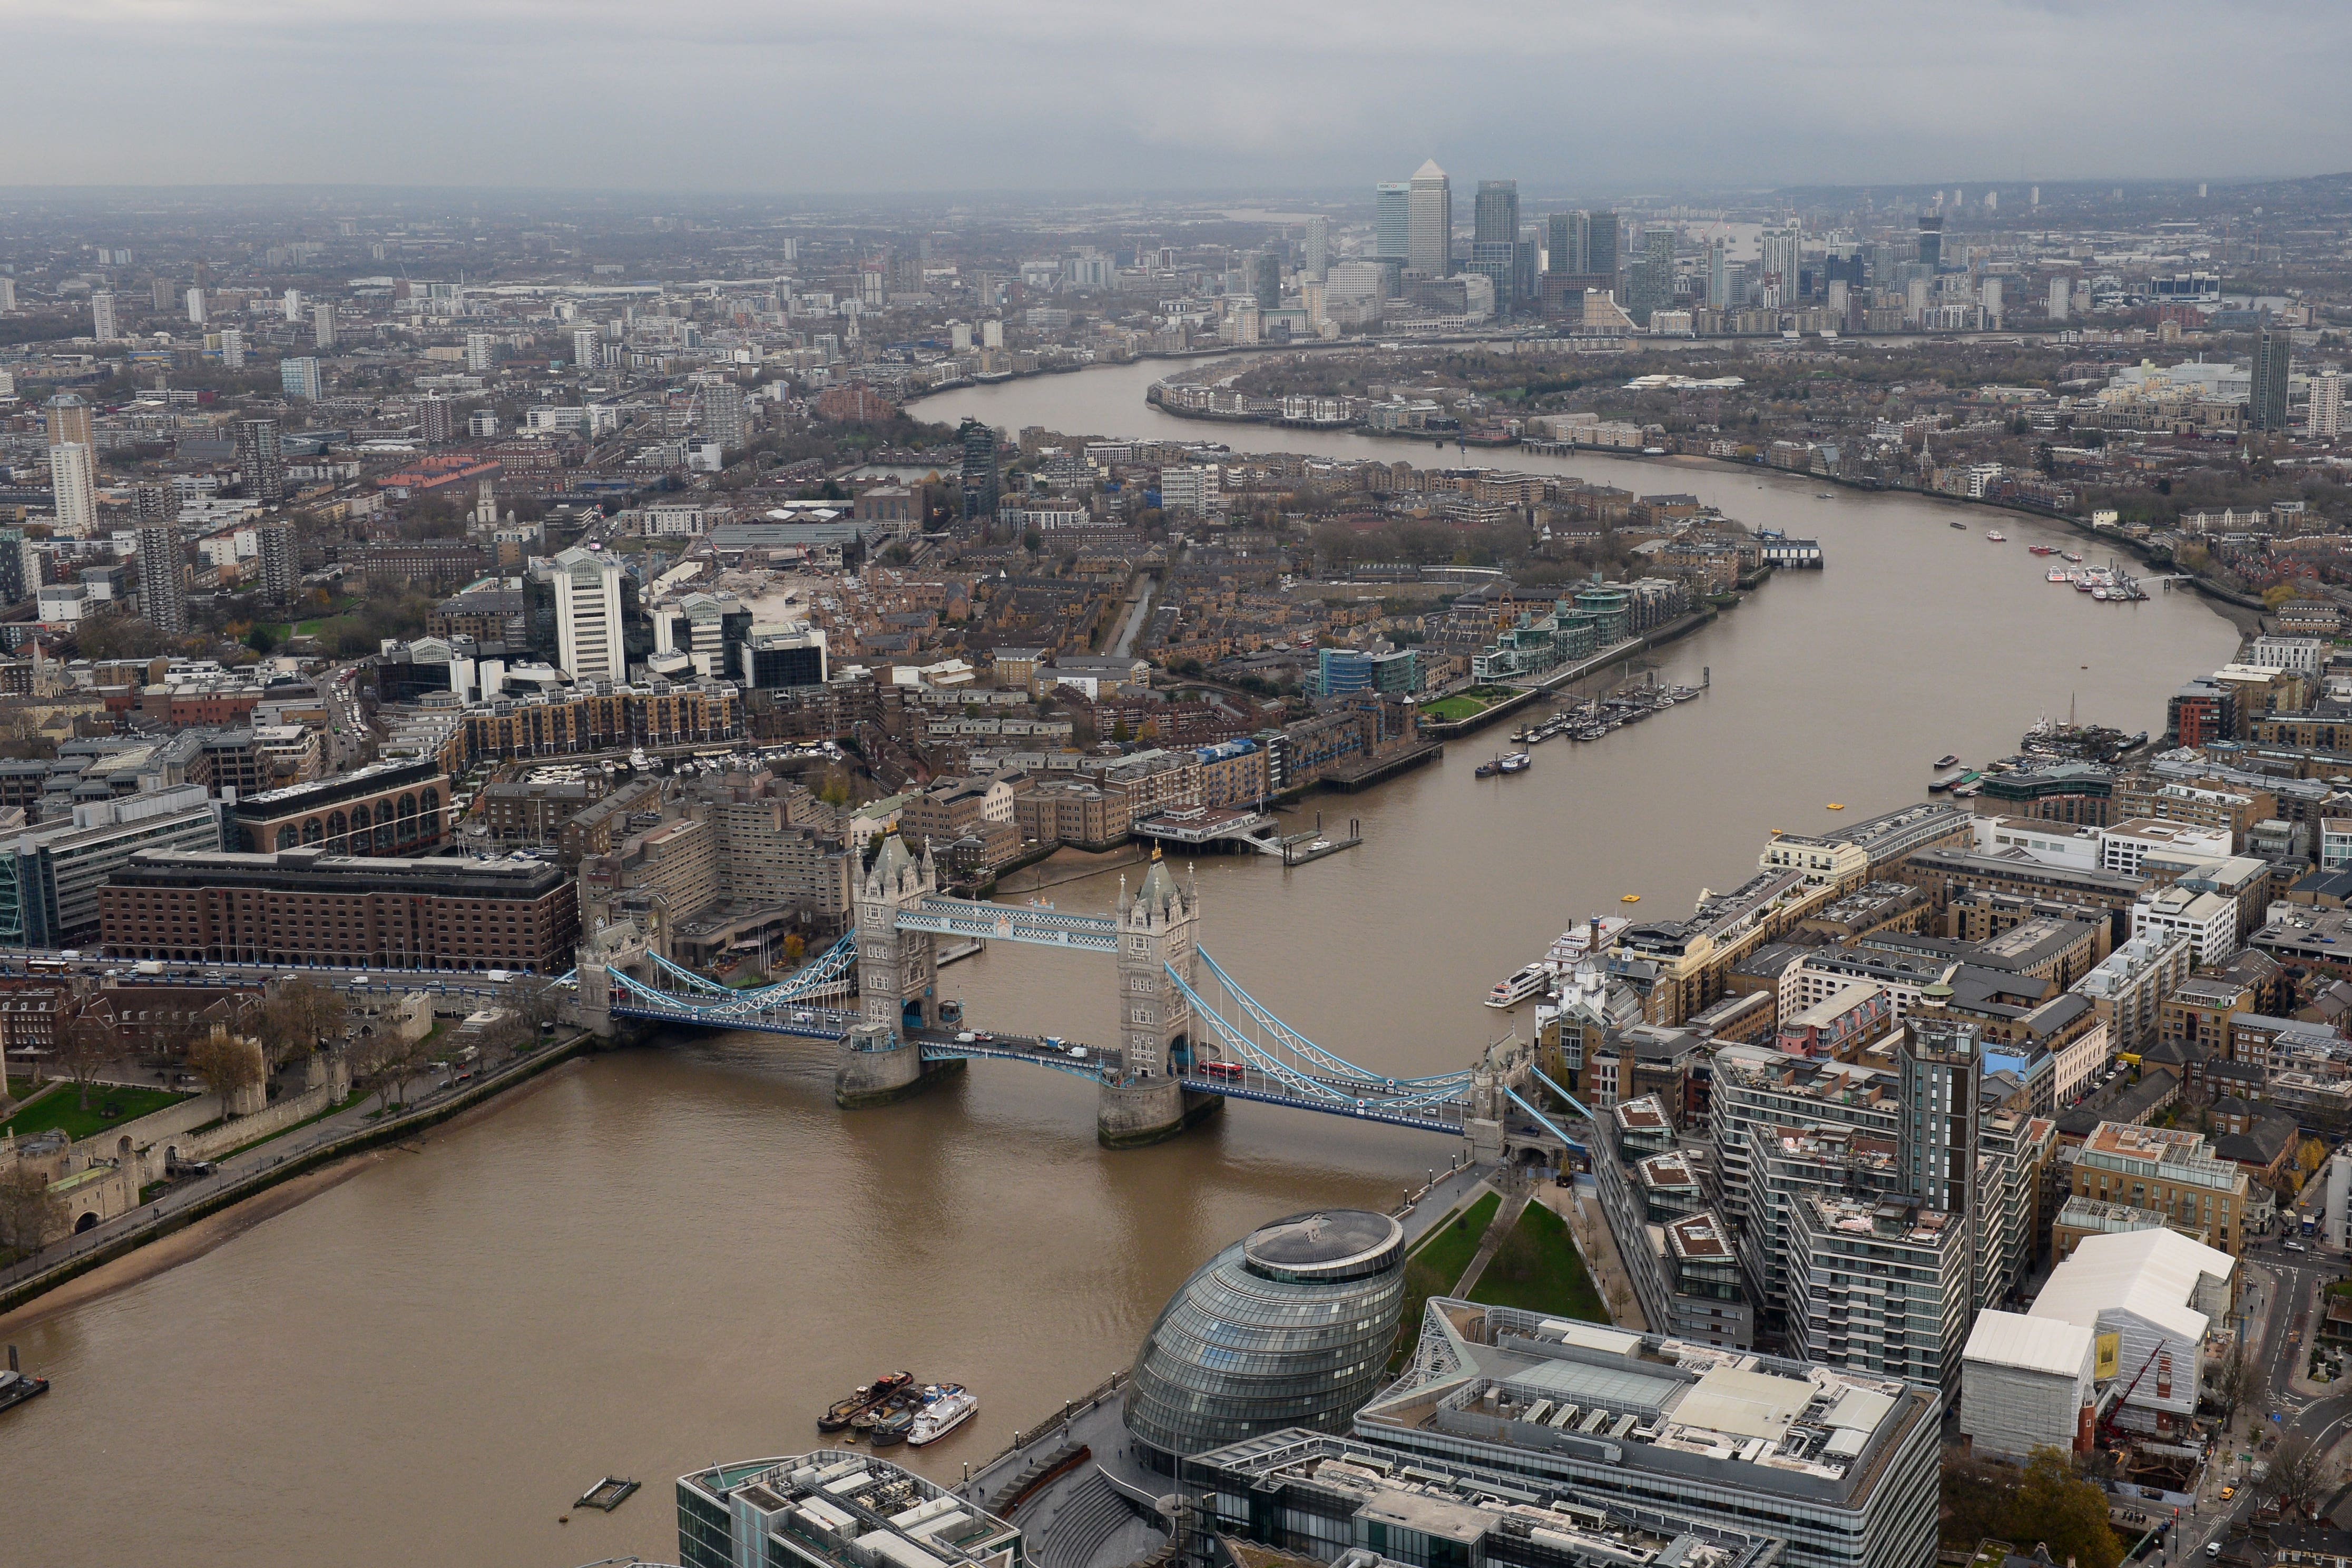 The London market kicks off 2023 with a gloomy backdrop as the UK is forecasted to plunge into recession and economies globally wrestle with sky-high inflation amid the energy and cost crisis.